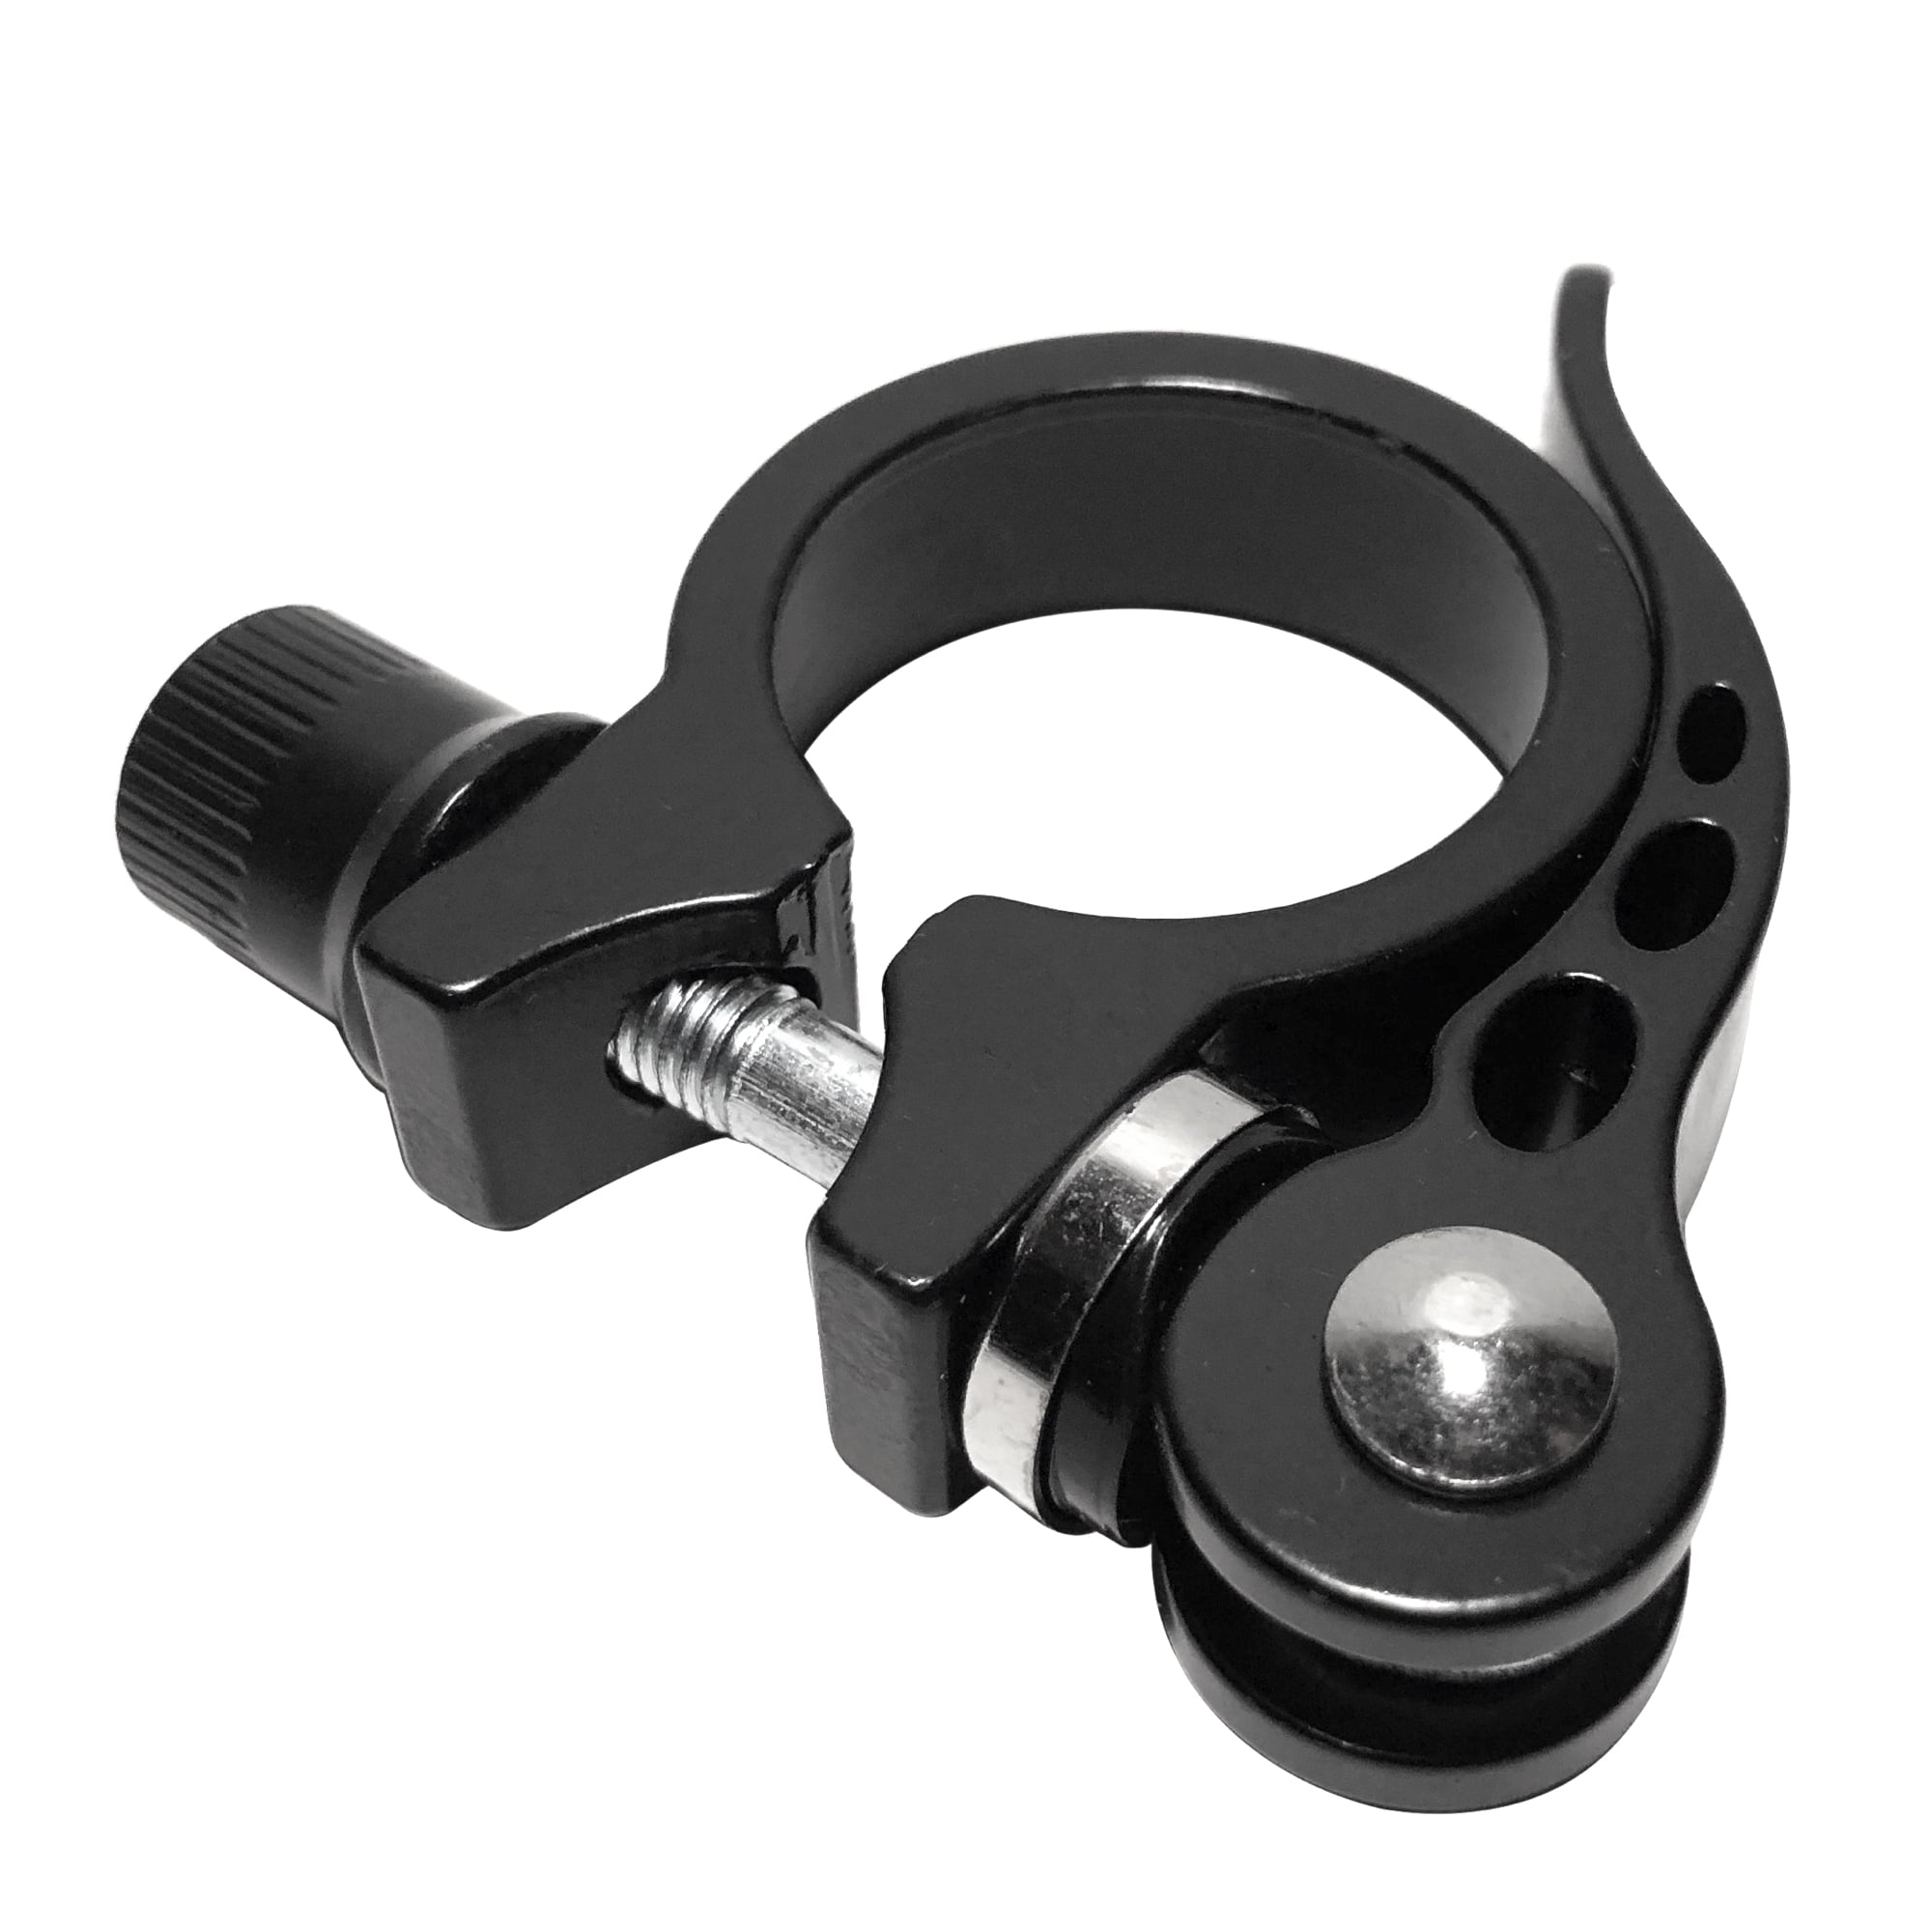 VGEBY Bike Quick Release Seat Post Clamp Aluminium Alloy Clamp Fit for 30.4/30.8/31.6mm